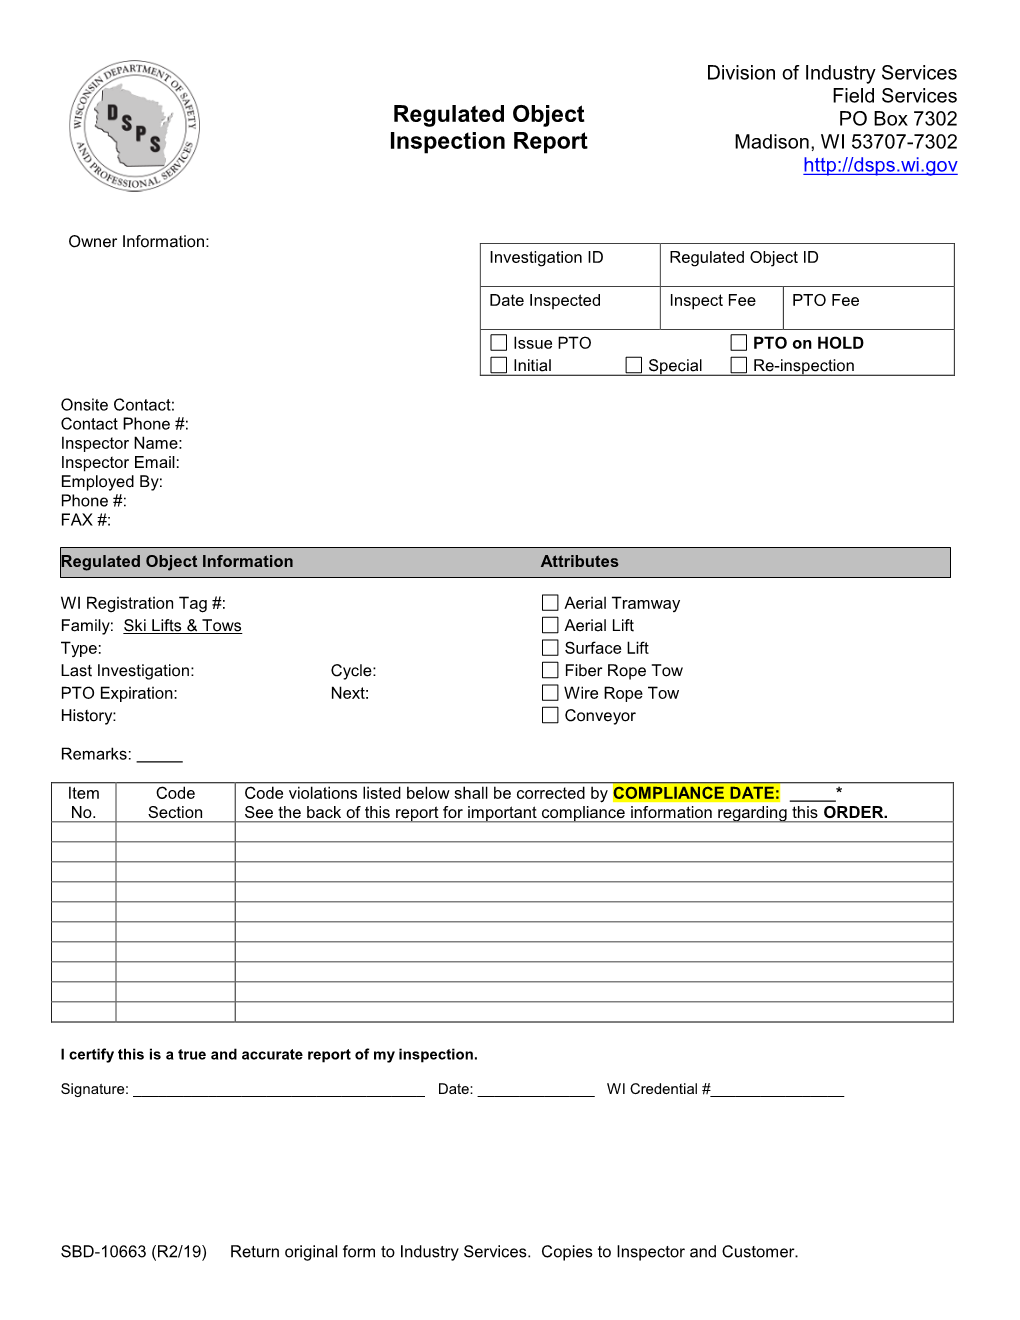 SBD-10663 (R2/19) Return Original Form to Industry Services